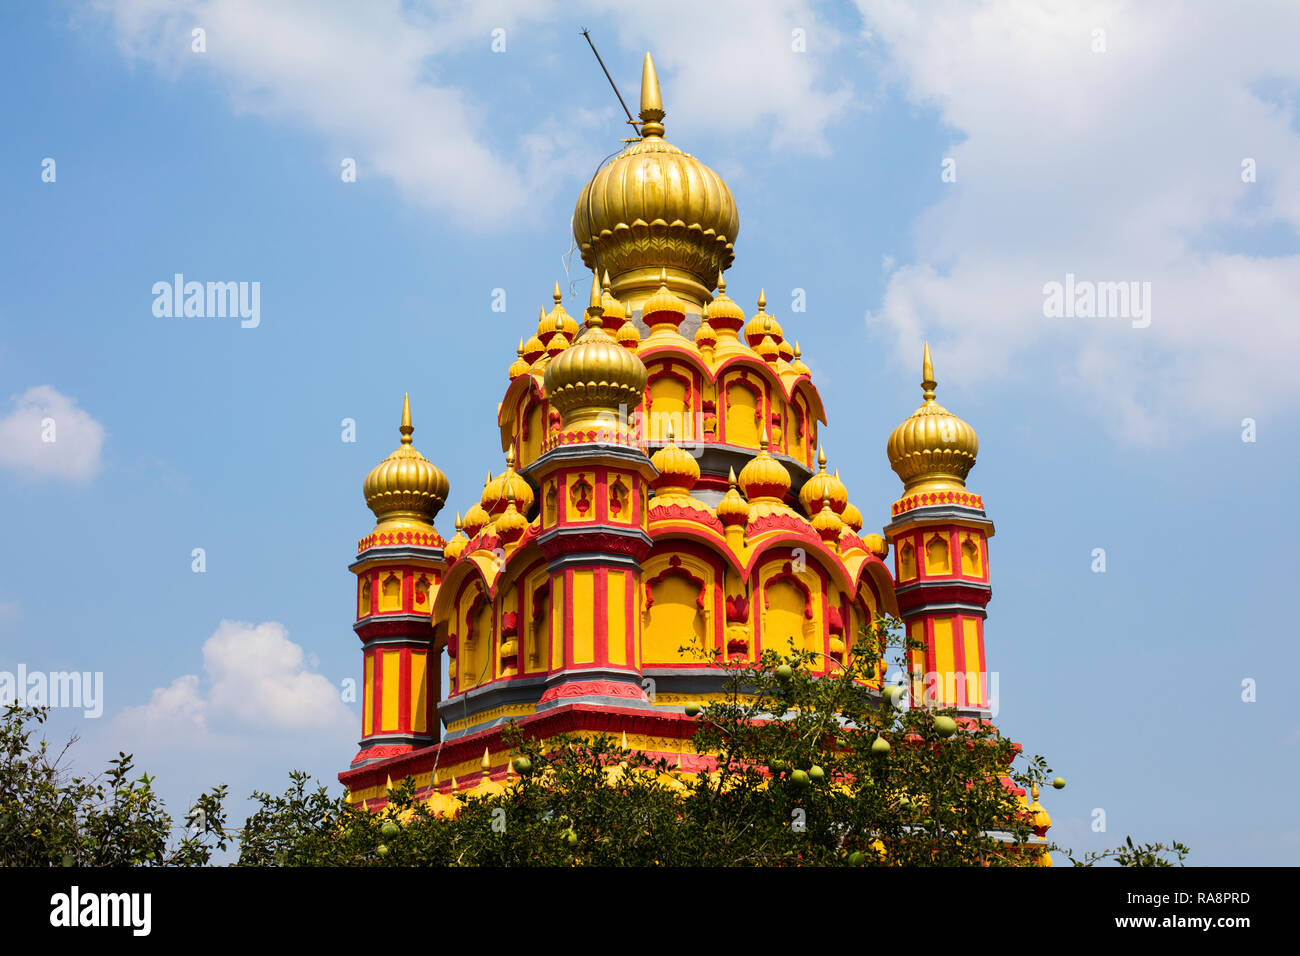 Pune, Maharashtra / India - October 2015: The Parvati Hill Temple in the city of Pune, India. Stock Photo